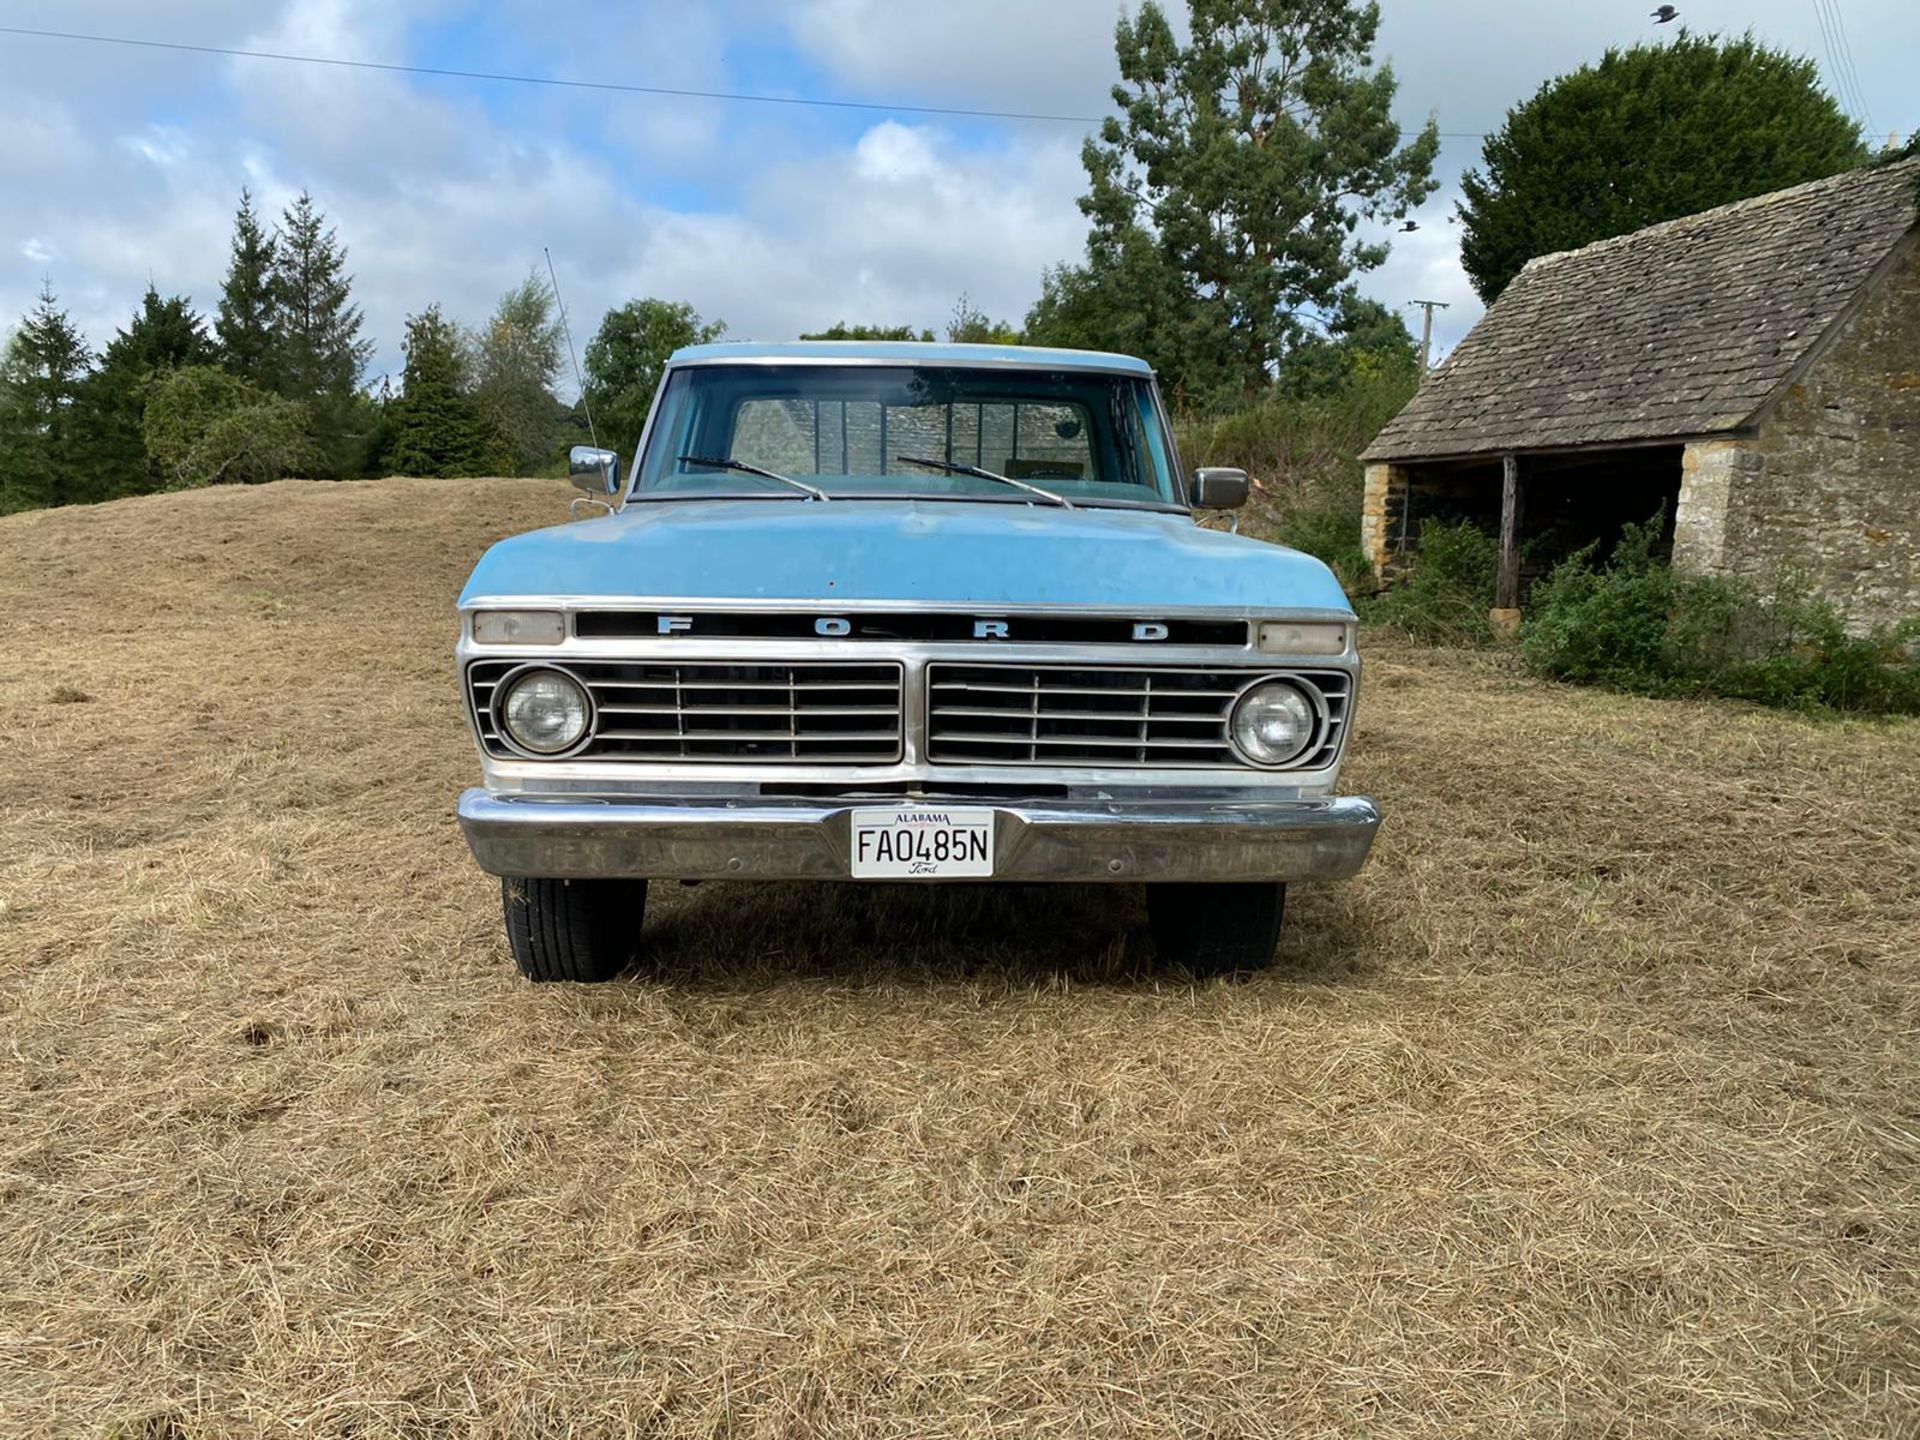 1975 FORD F-250 6.4 (390) V8, 4 SPEED MANUAL, HAS JUST BEEN REGISTERED, NEW BENCH SEAT *NO VAT* - Image 5 of 22